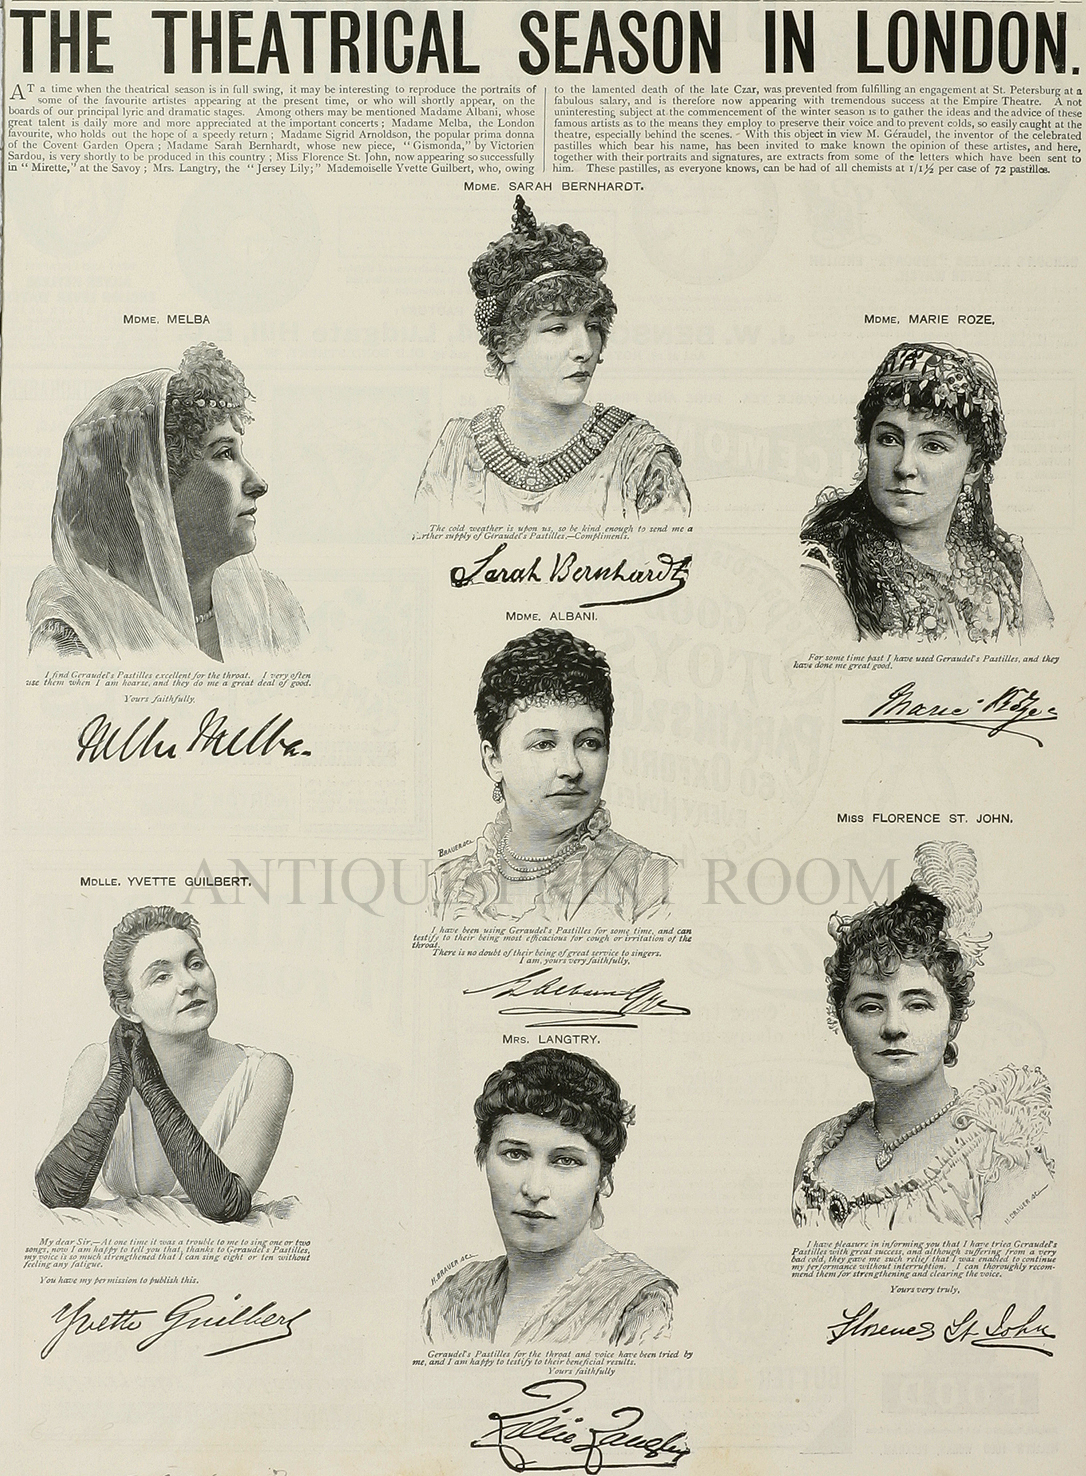 The Theatrical Season in London - Antique Print from 1894